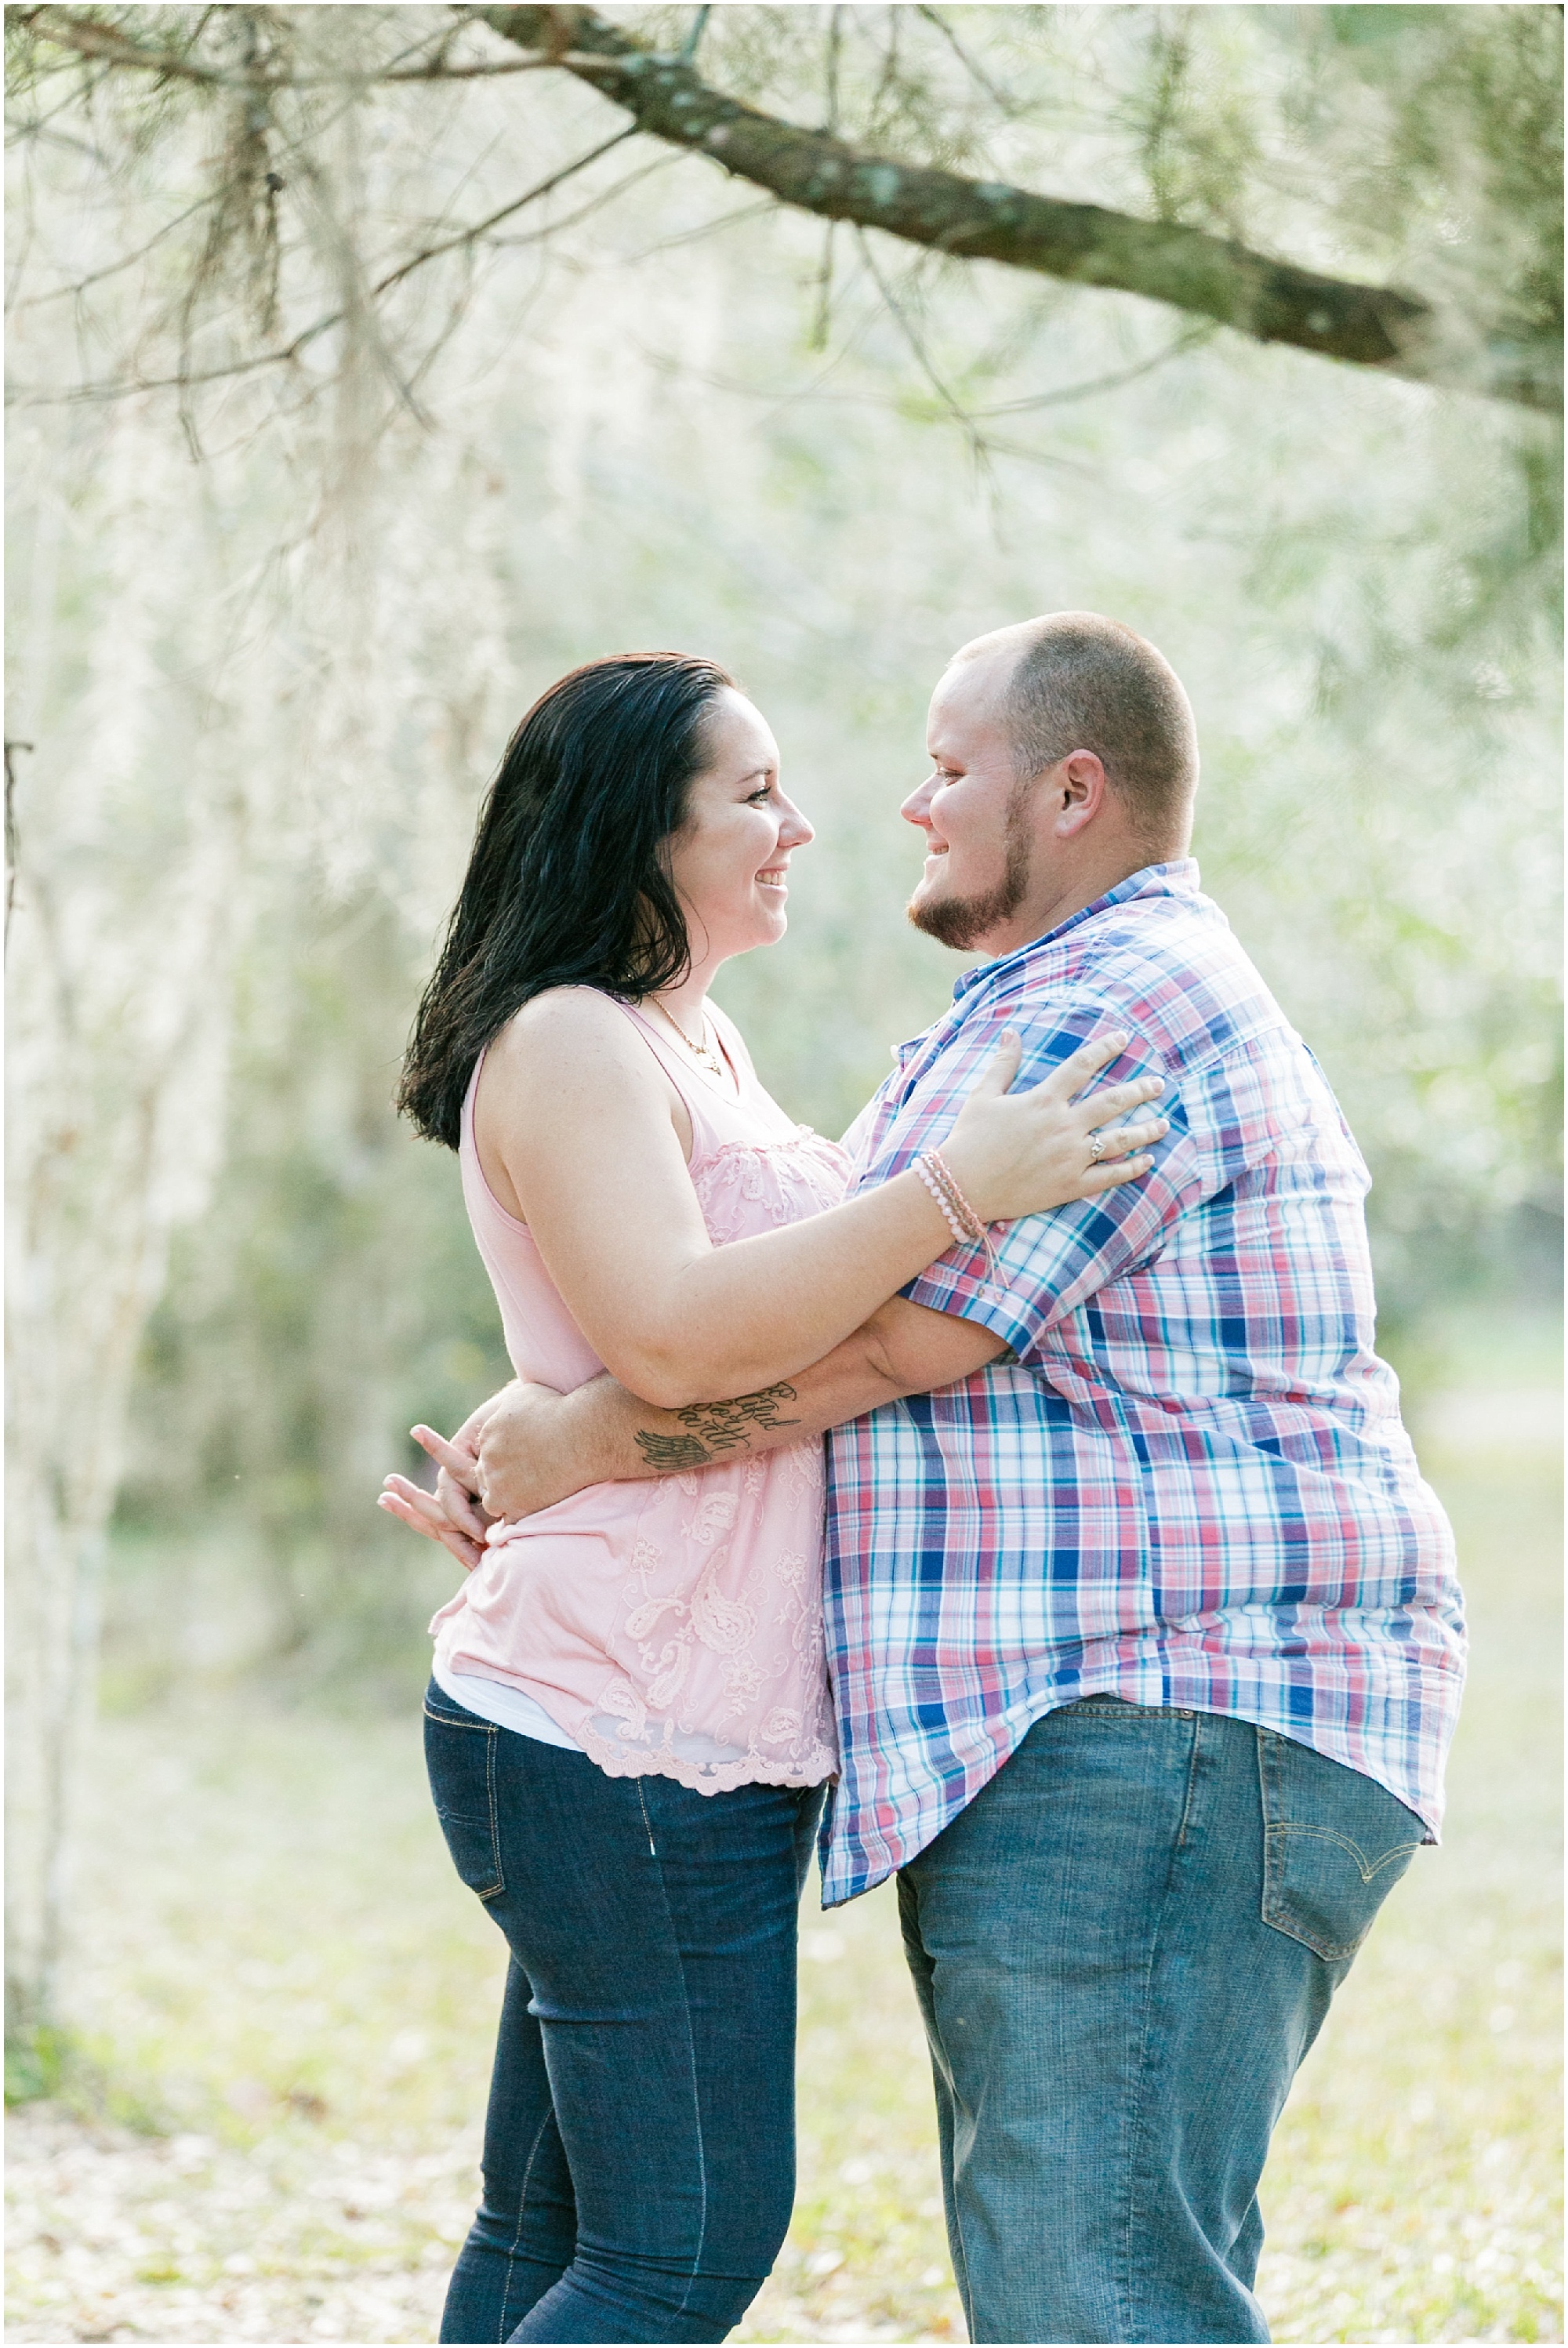 Monster Truck Engagement Session couple holding each other at their outdoor session.